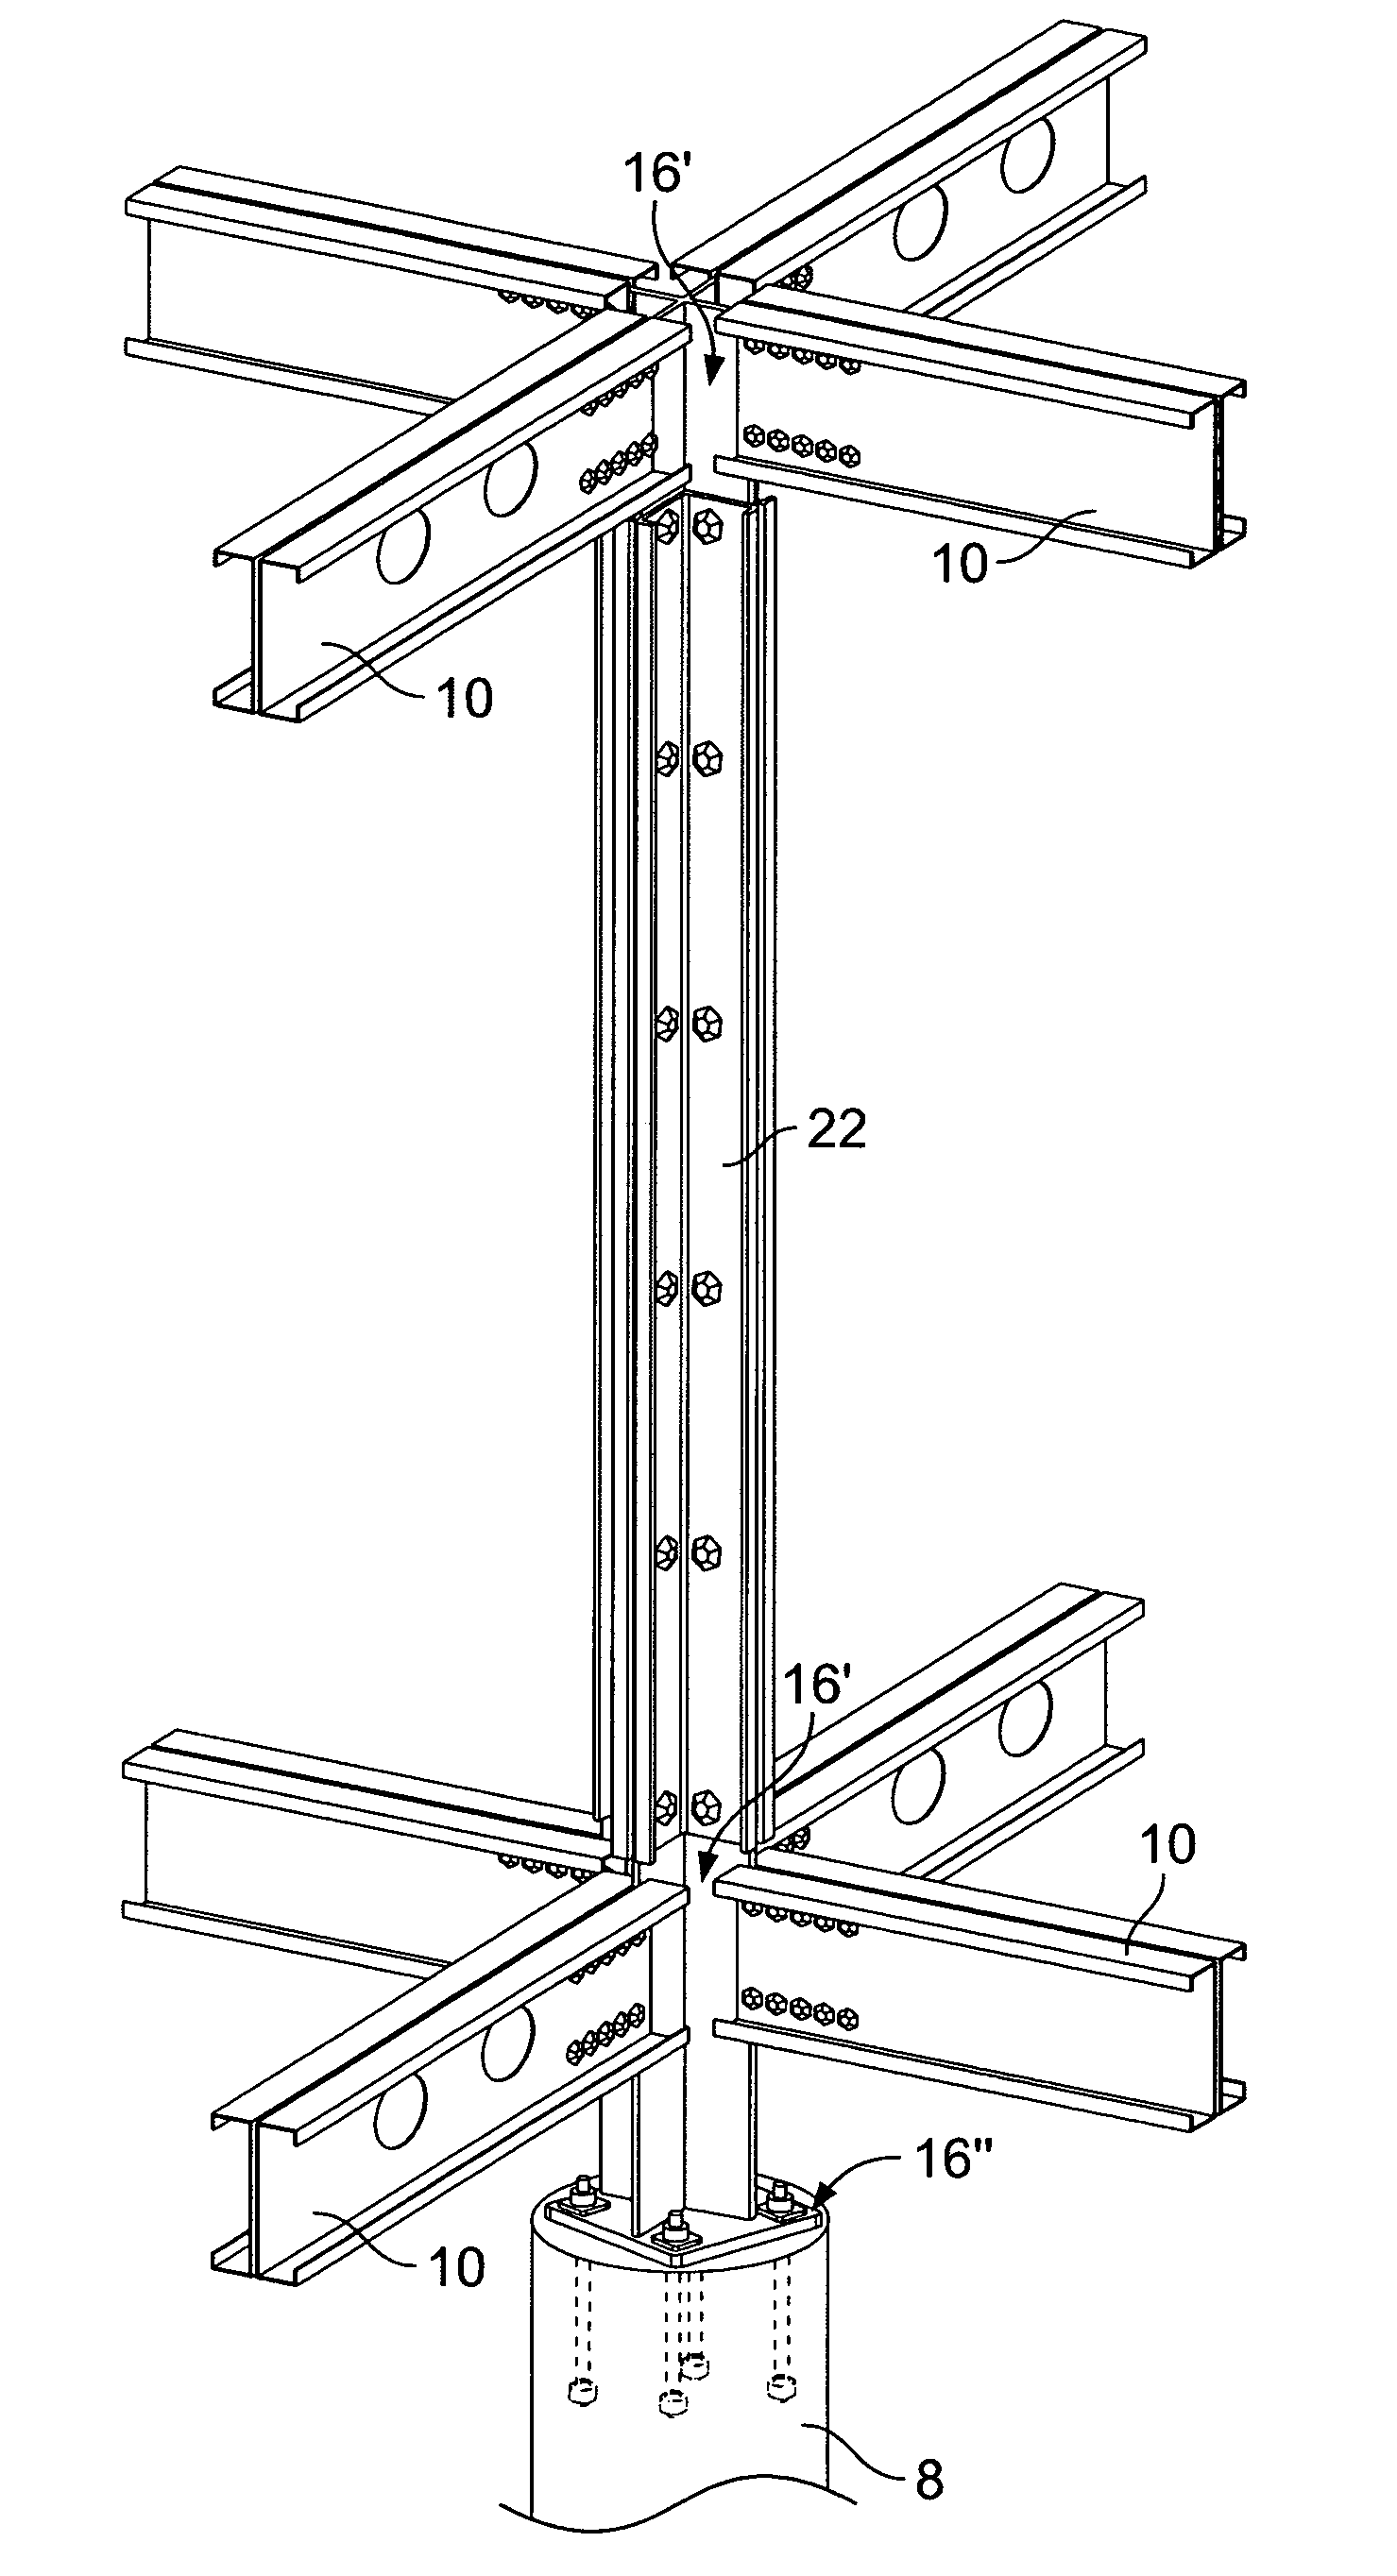 Two-way architectural structural system and modular support member